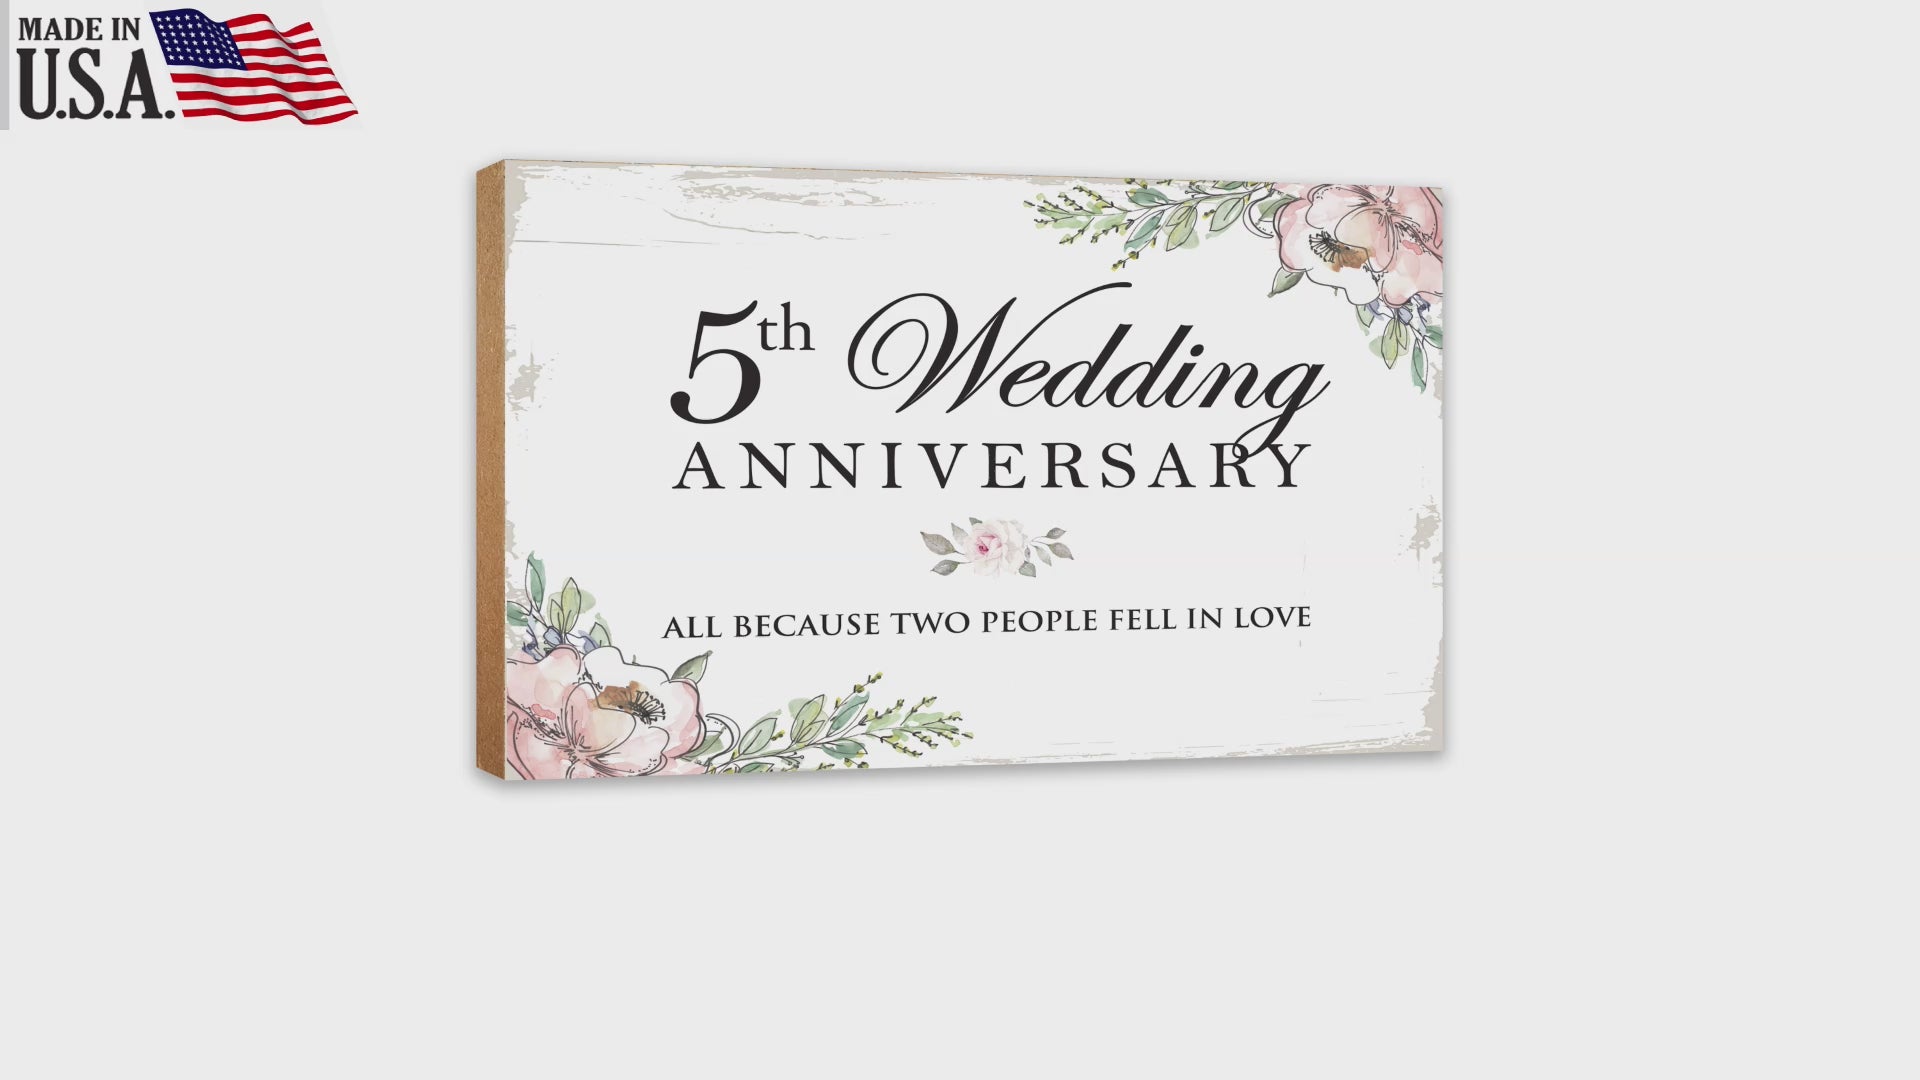 5th Wedding Anniversary Unique Shelf Decor and Tabletop Signs Gifts for Couples - Fell In Love